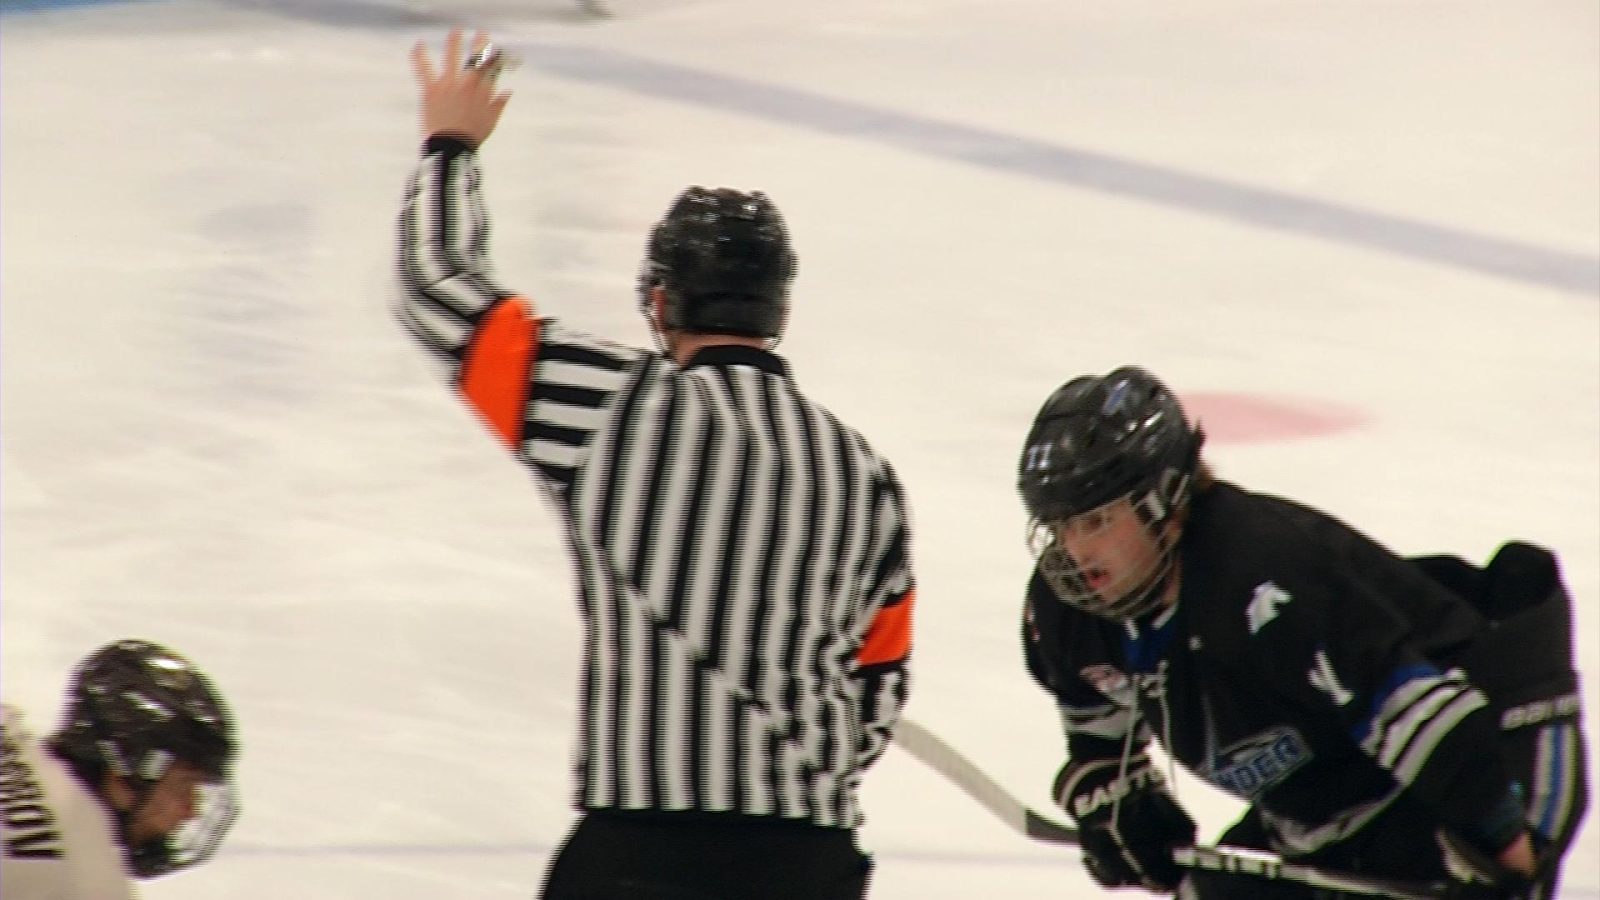 A bill in the Minnesota Senate would stiffen penalties for anyone who attacks a sports official.